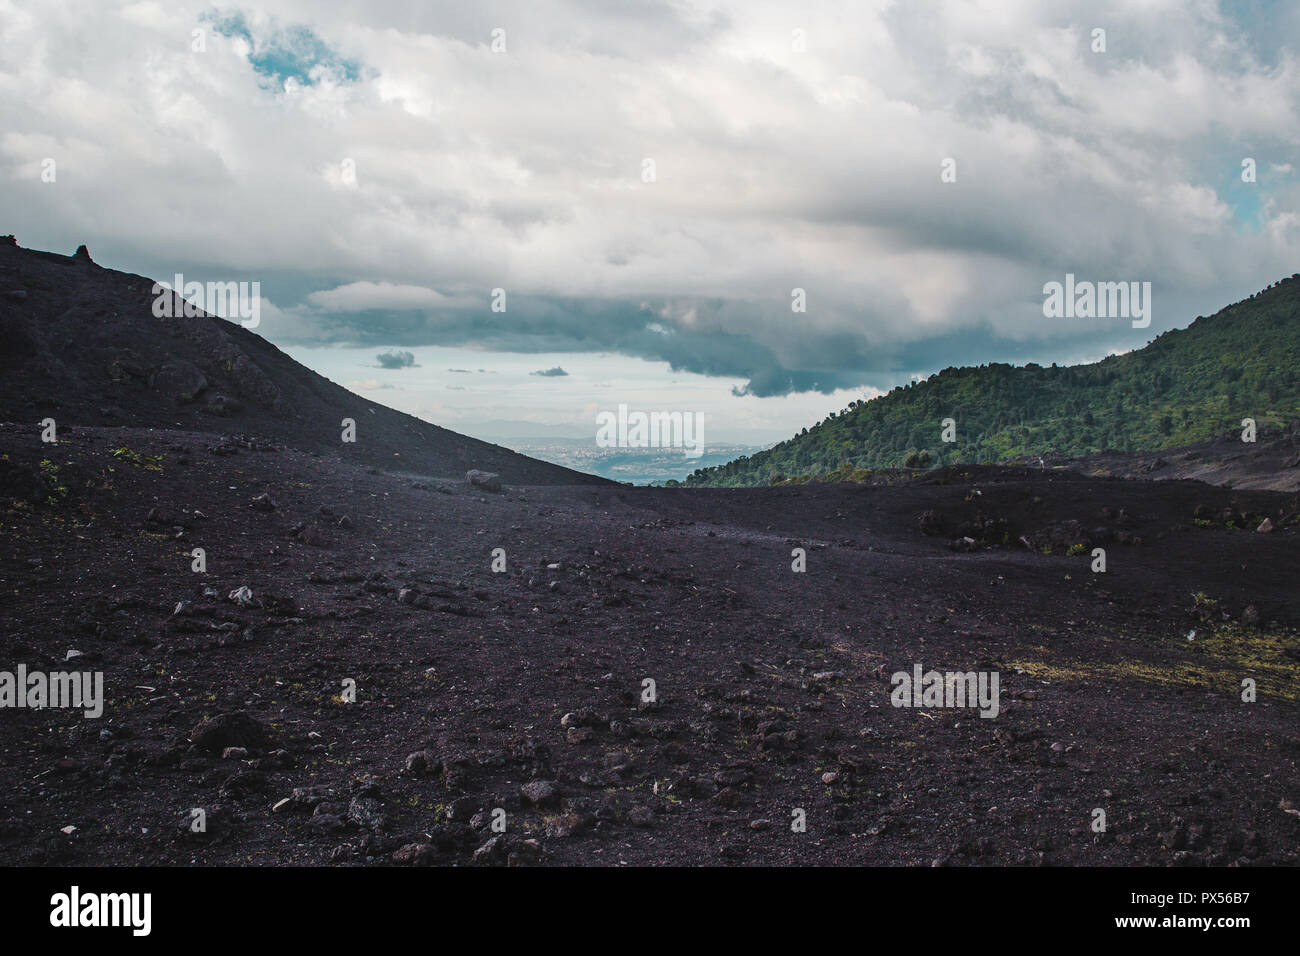 Changing landscapes around the Volcan Pacaya, one of Guatemala's most active volcanoes, from black volcanic rock to lush green forests Stock Photo